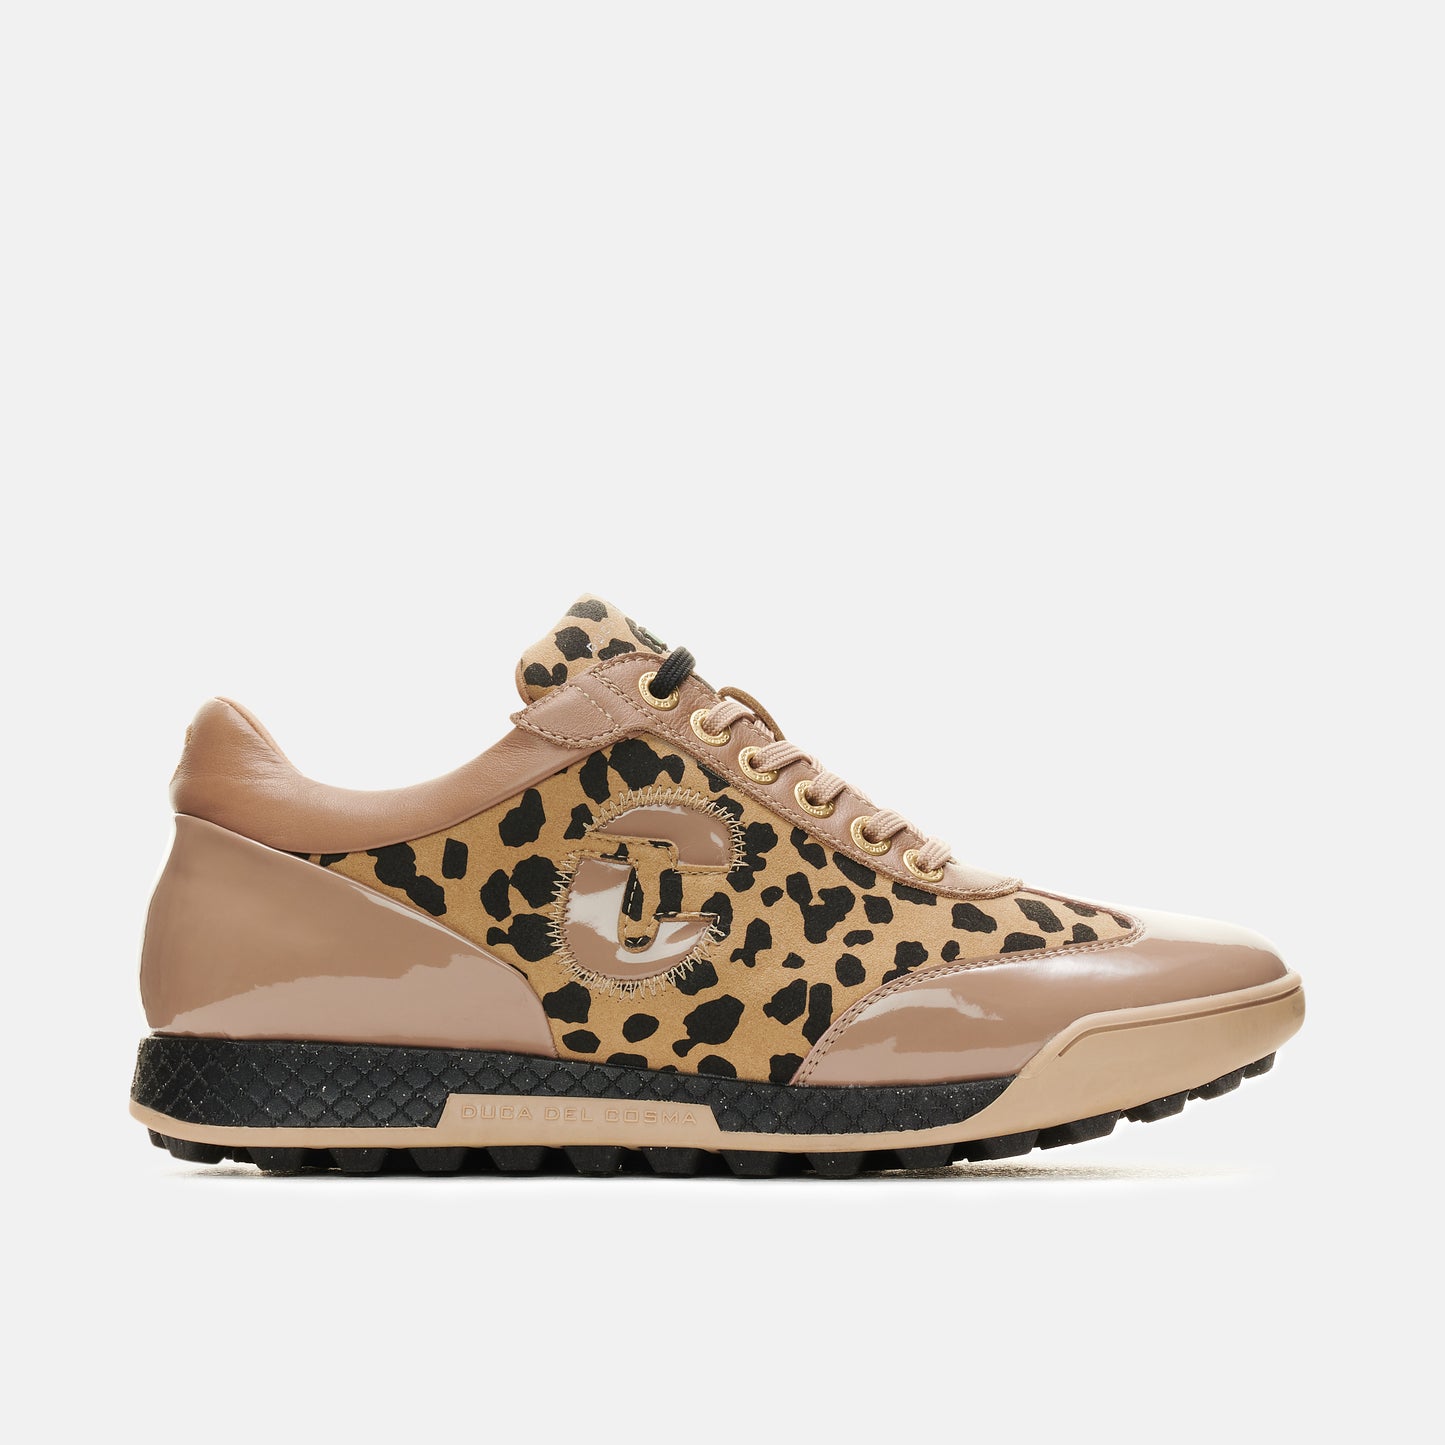 King Cheetah taupe Women's Golf shoe fully waterproof with animal print from duca del cosma